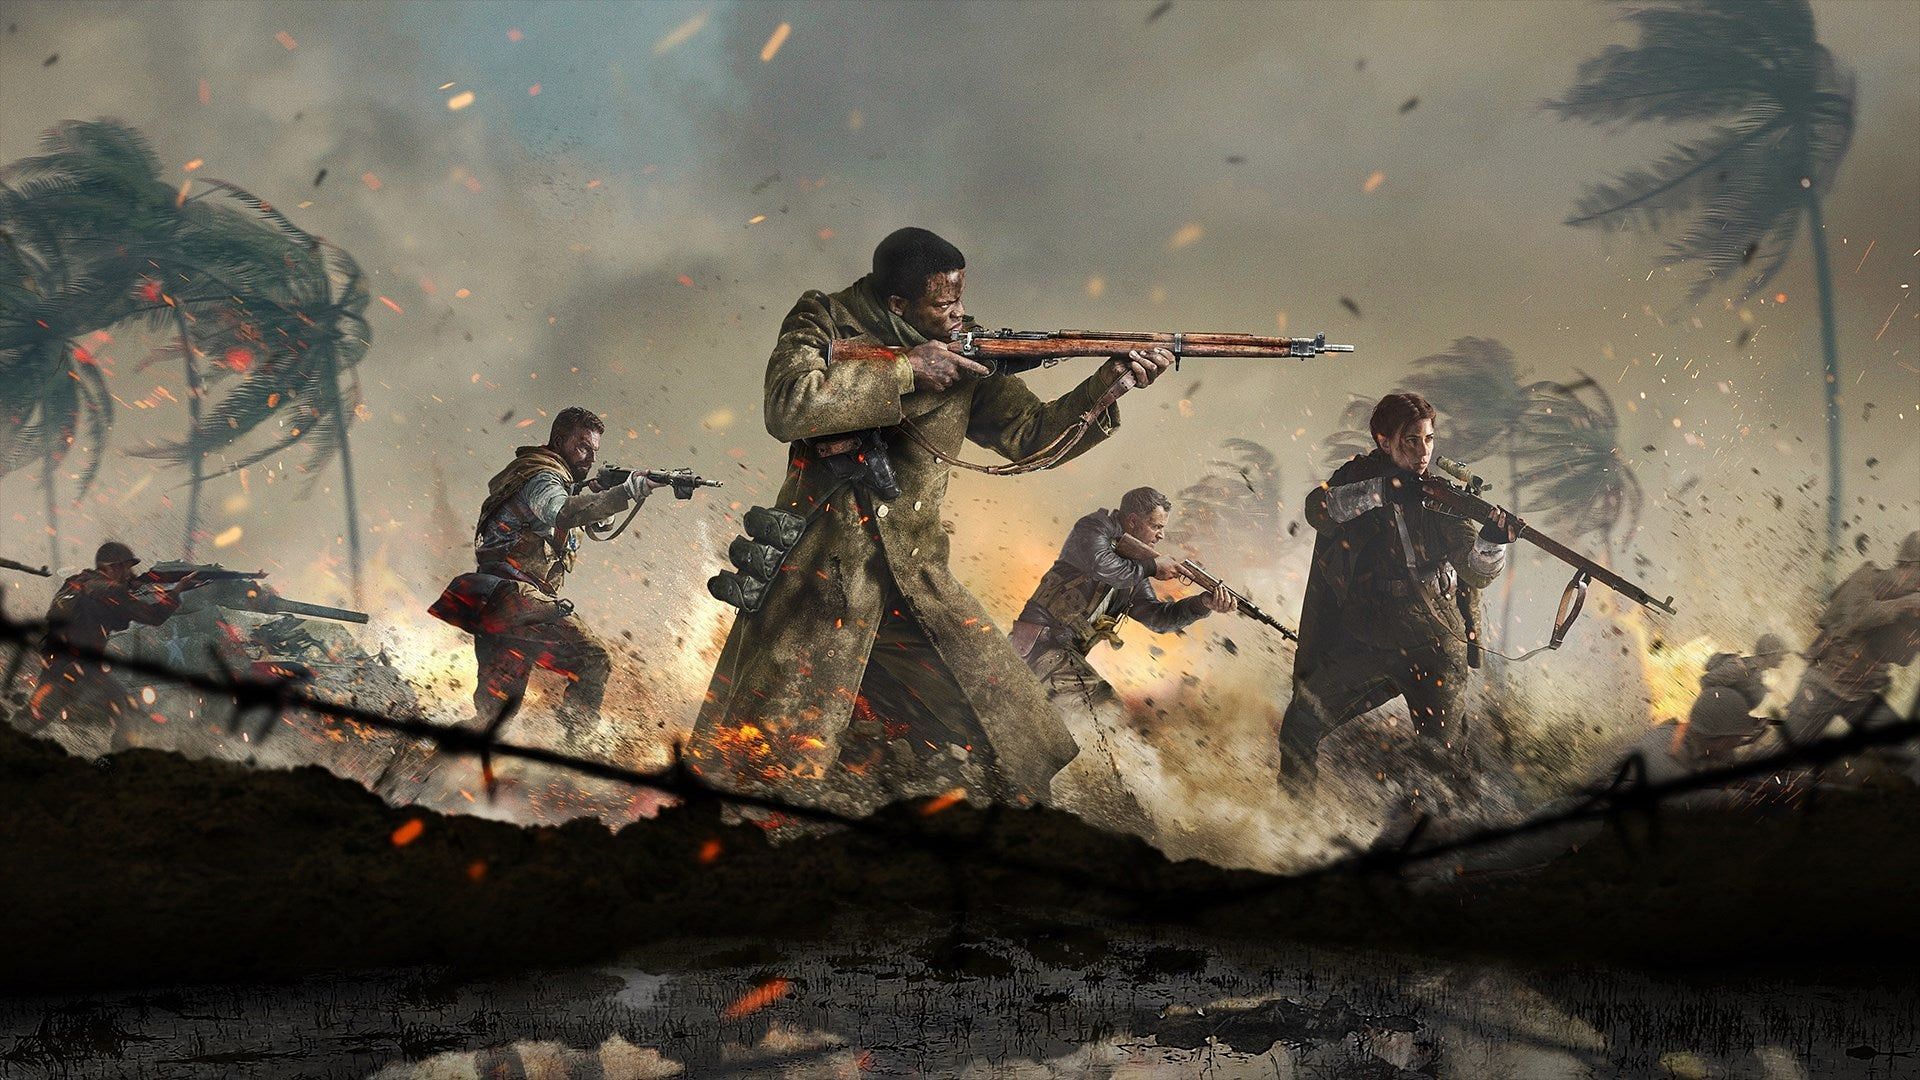 Call of Duty: Vanguard will take place during World War II (Image via Activision)